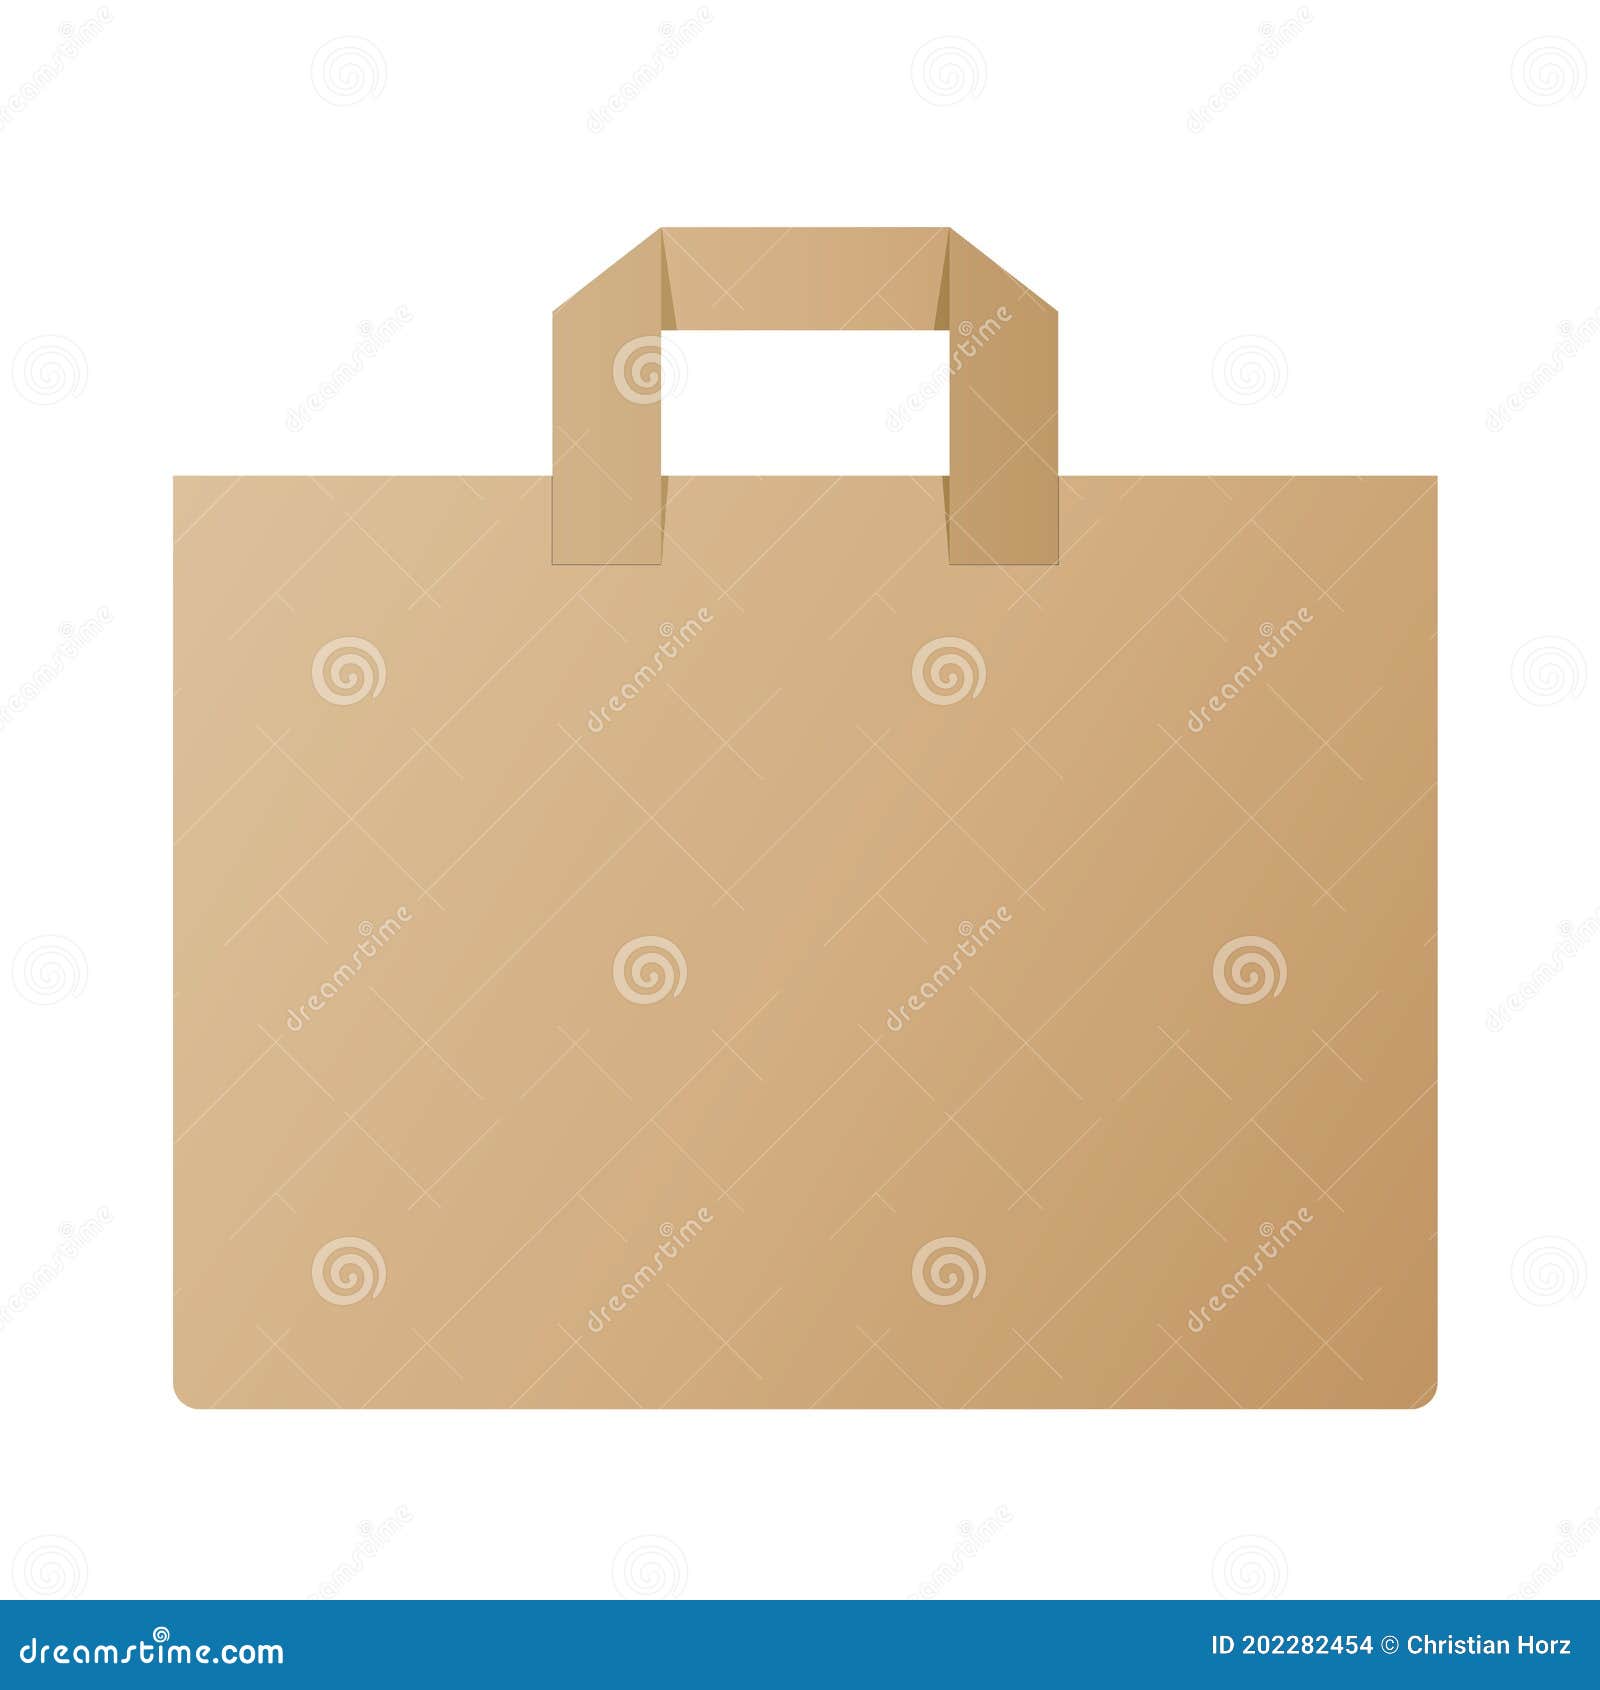 Blank Canvas Tote Bag Flat Design Isolated On White Background Stock  Illustration - Download Image Now - iStock